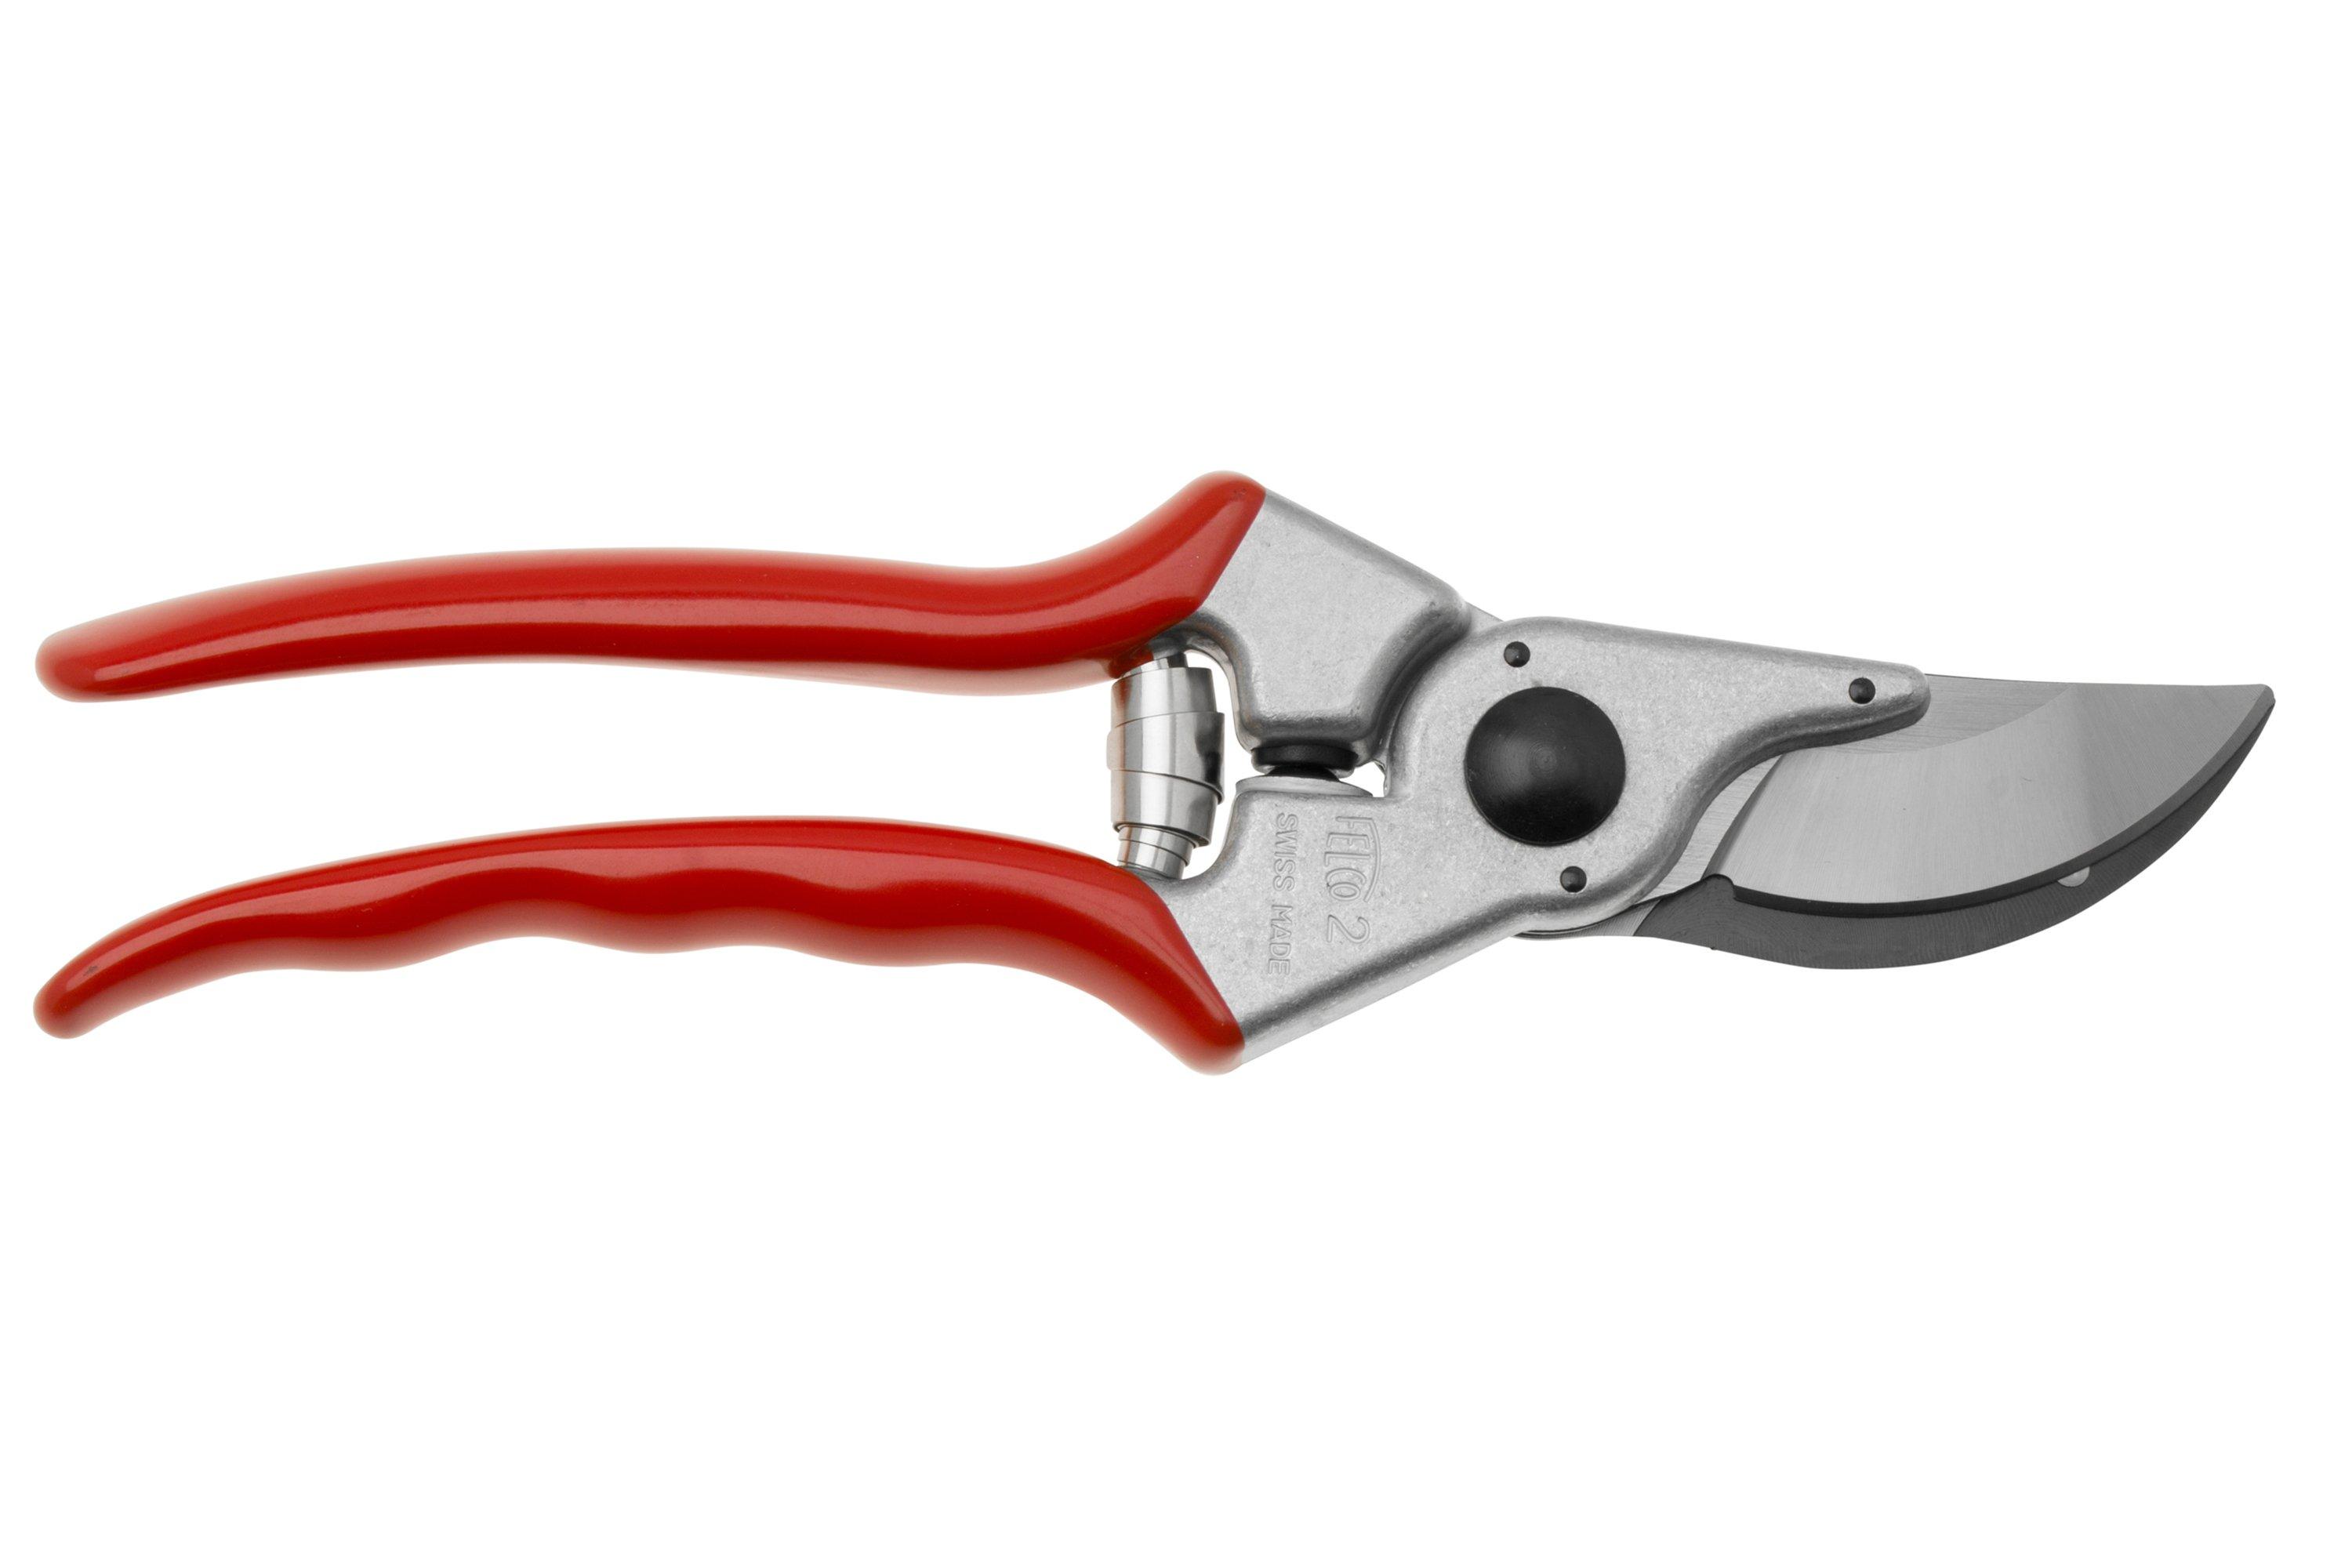 Felco Special Pack, pruning shears #2 with hat  Advantageously shopping at